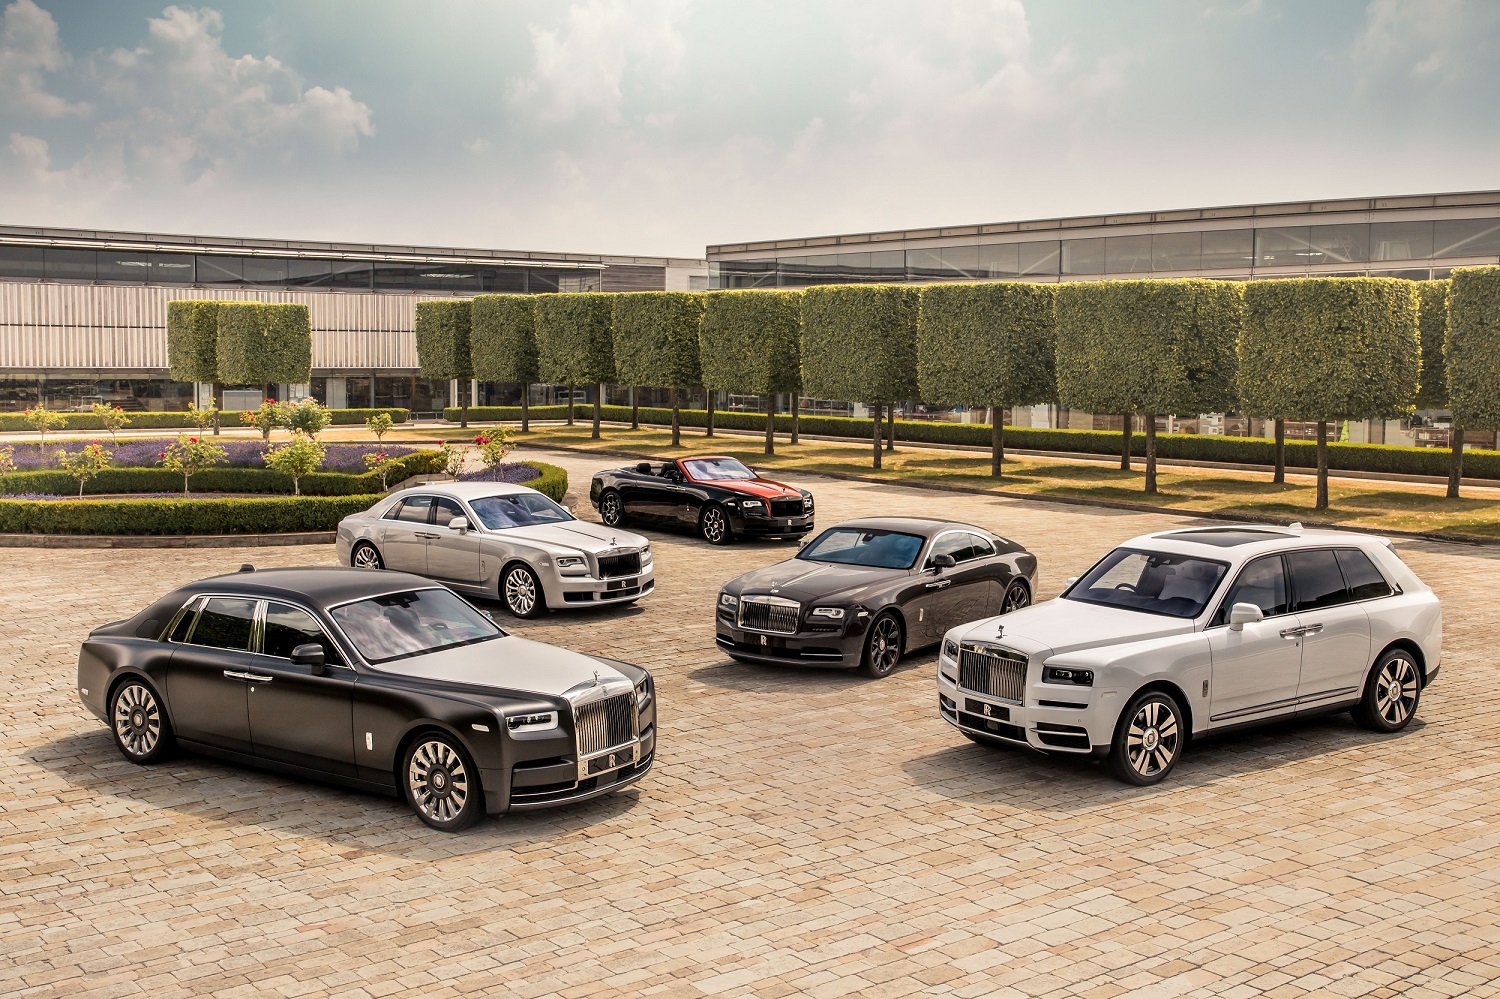 ROLLS-ROYCE MARKS 115 YEARS OF EXCELLENCE AND INNOVATION